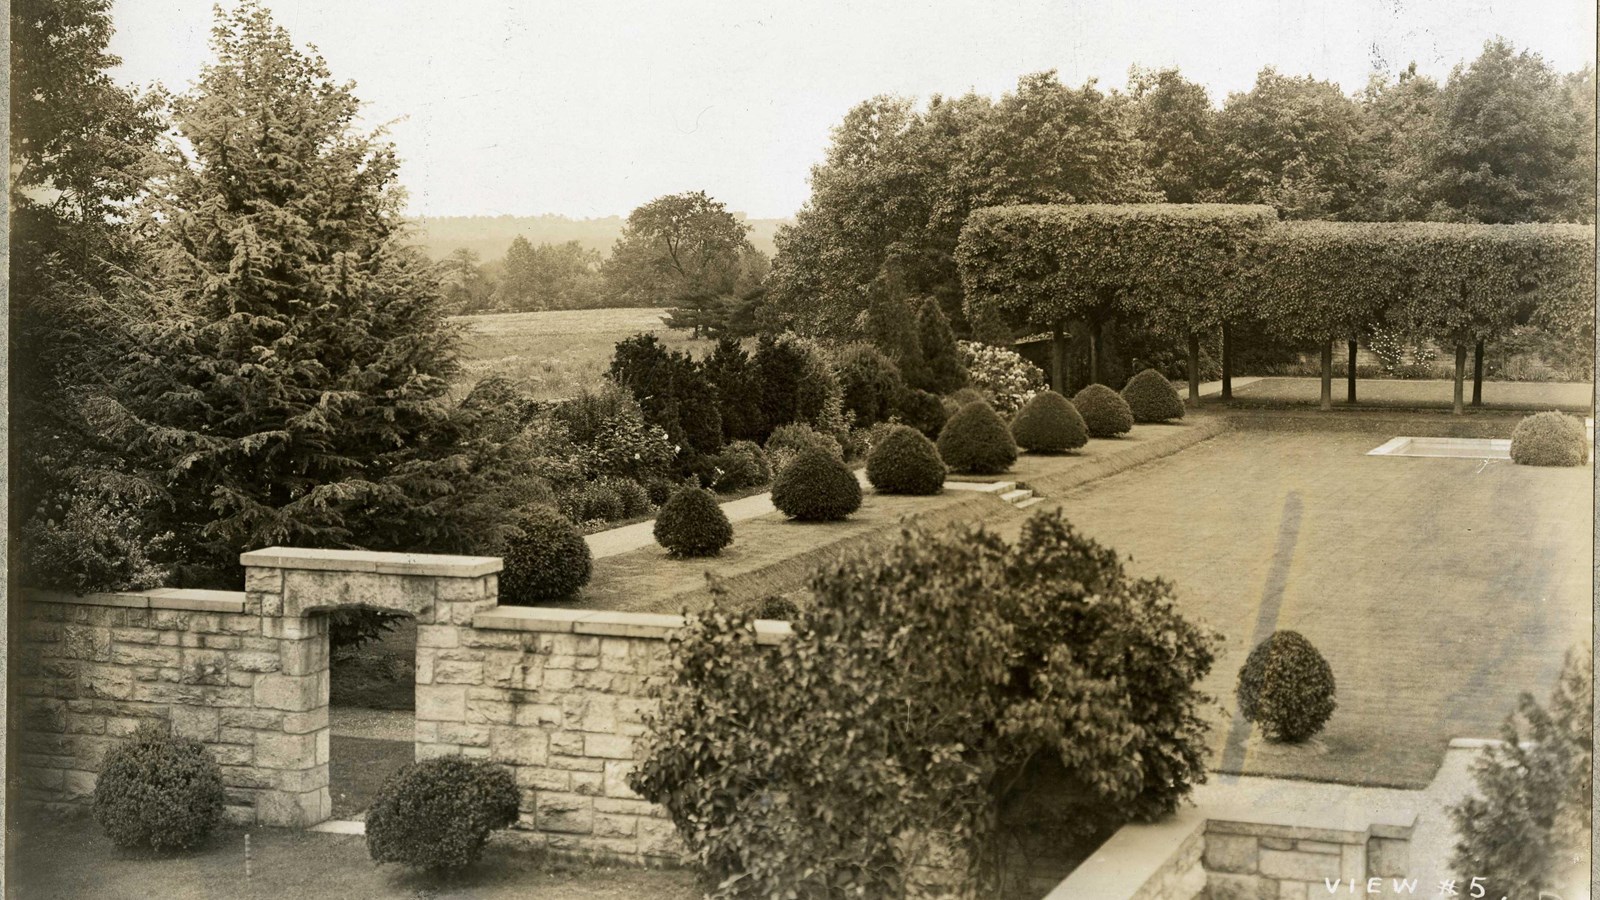 Black and white of flat grassy area with stone wall and a line of shrubs with trees in back